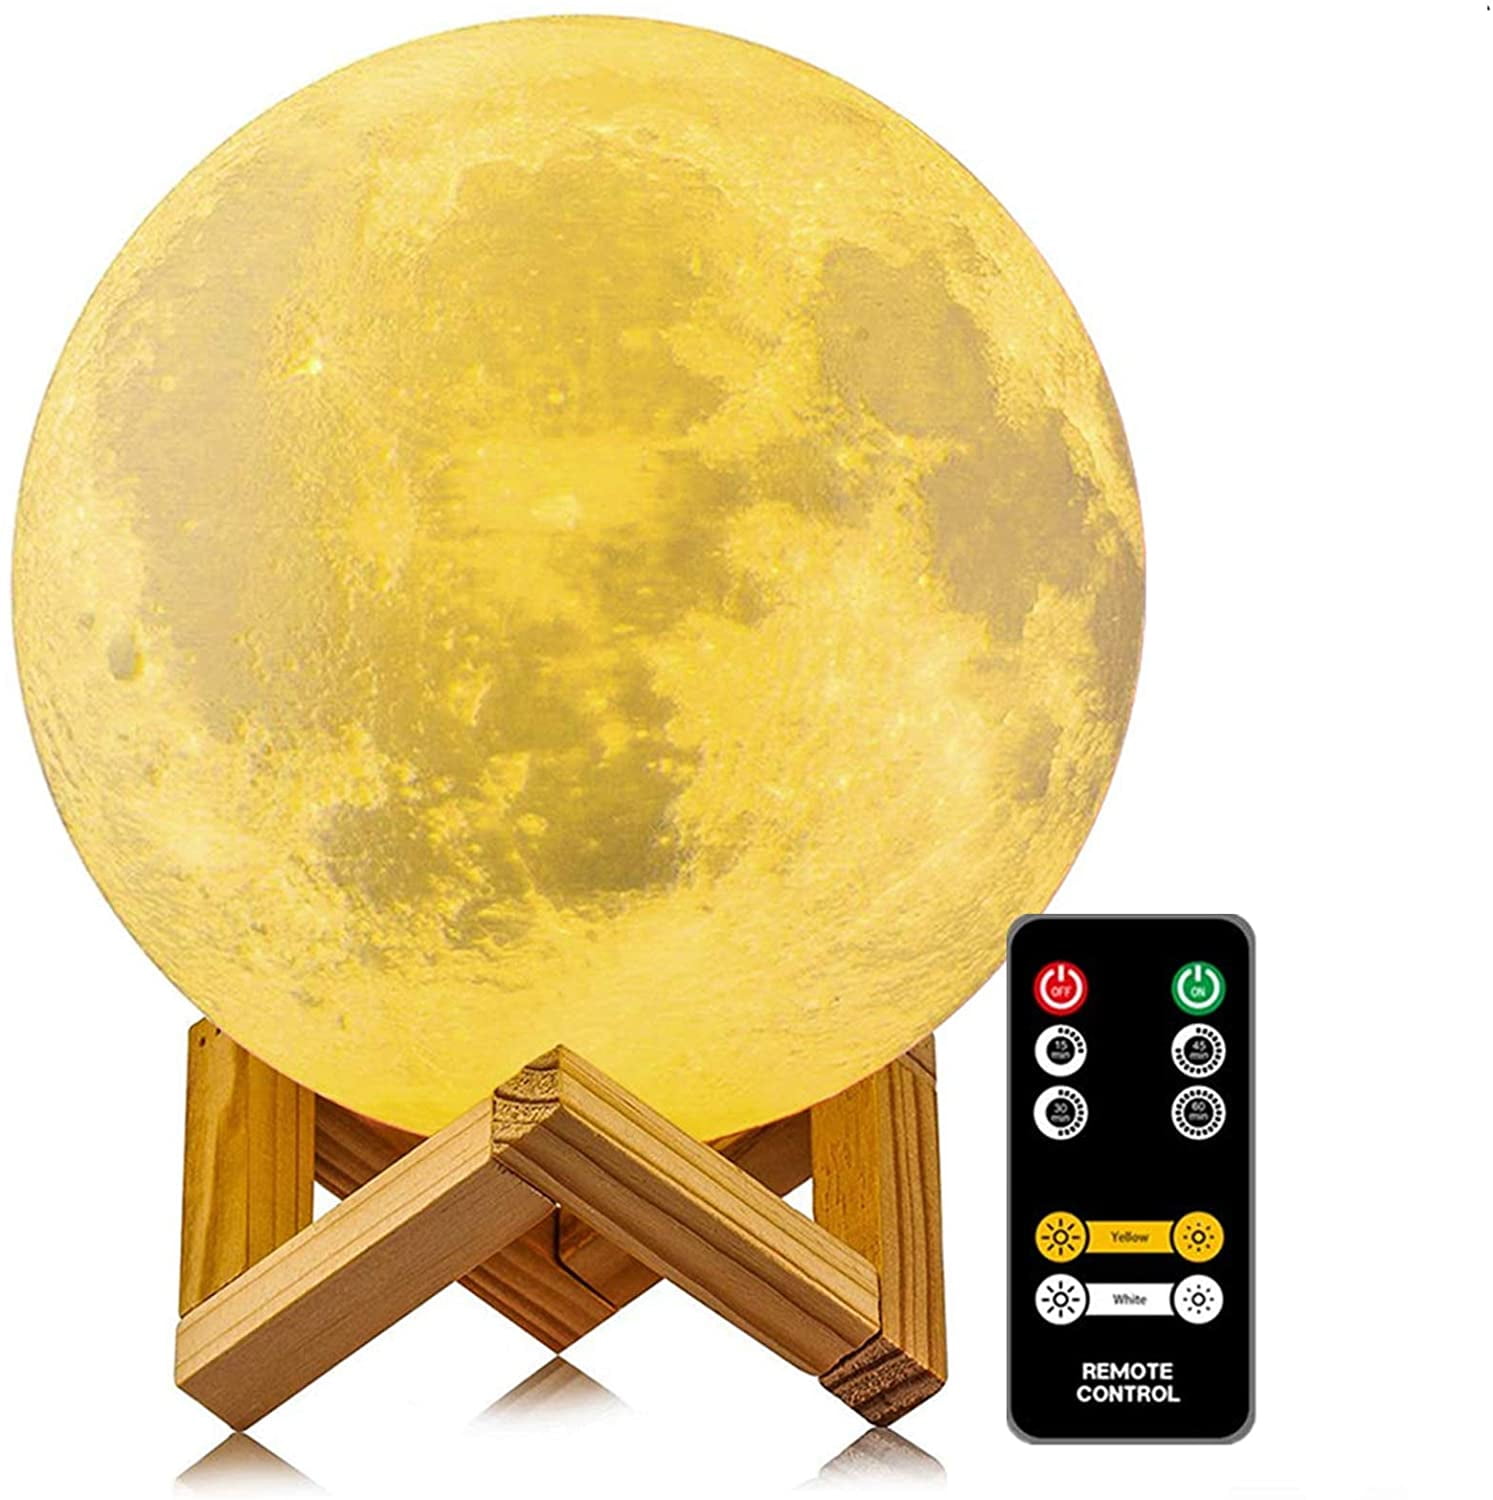 Moon Lamp, 3D Printing 2 Colors Led Moon Light Stand Time Moon Lamps with Remote & Touch Control and USB Recharge for Kids Lover Friend Birthday Gifts (5.96